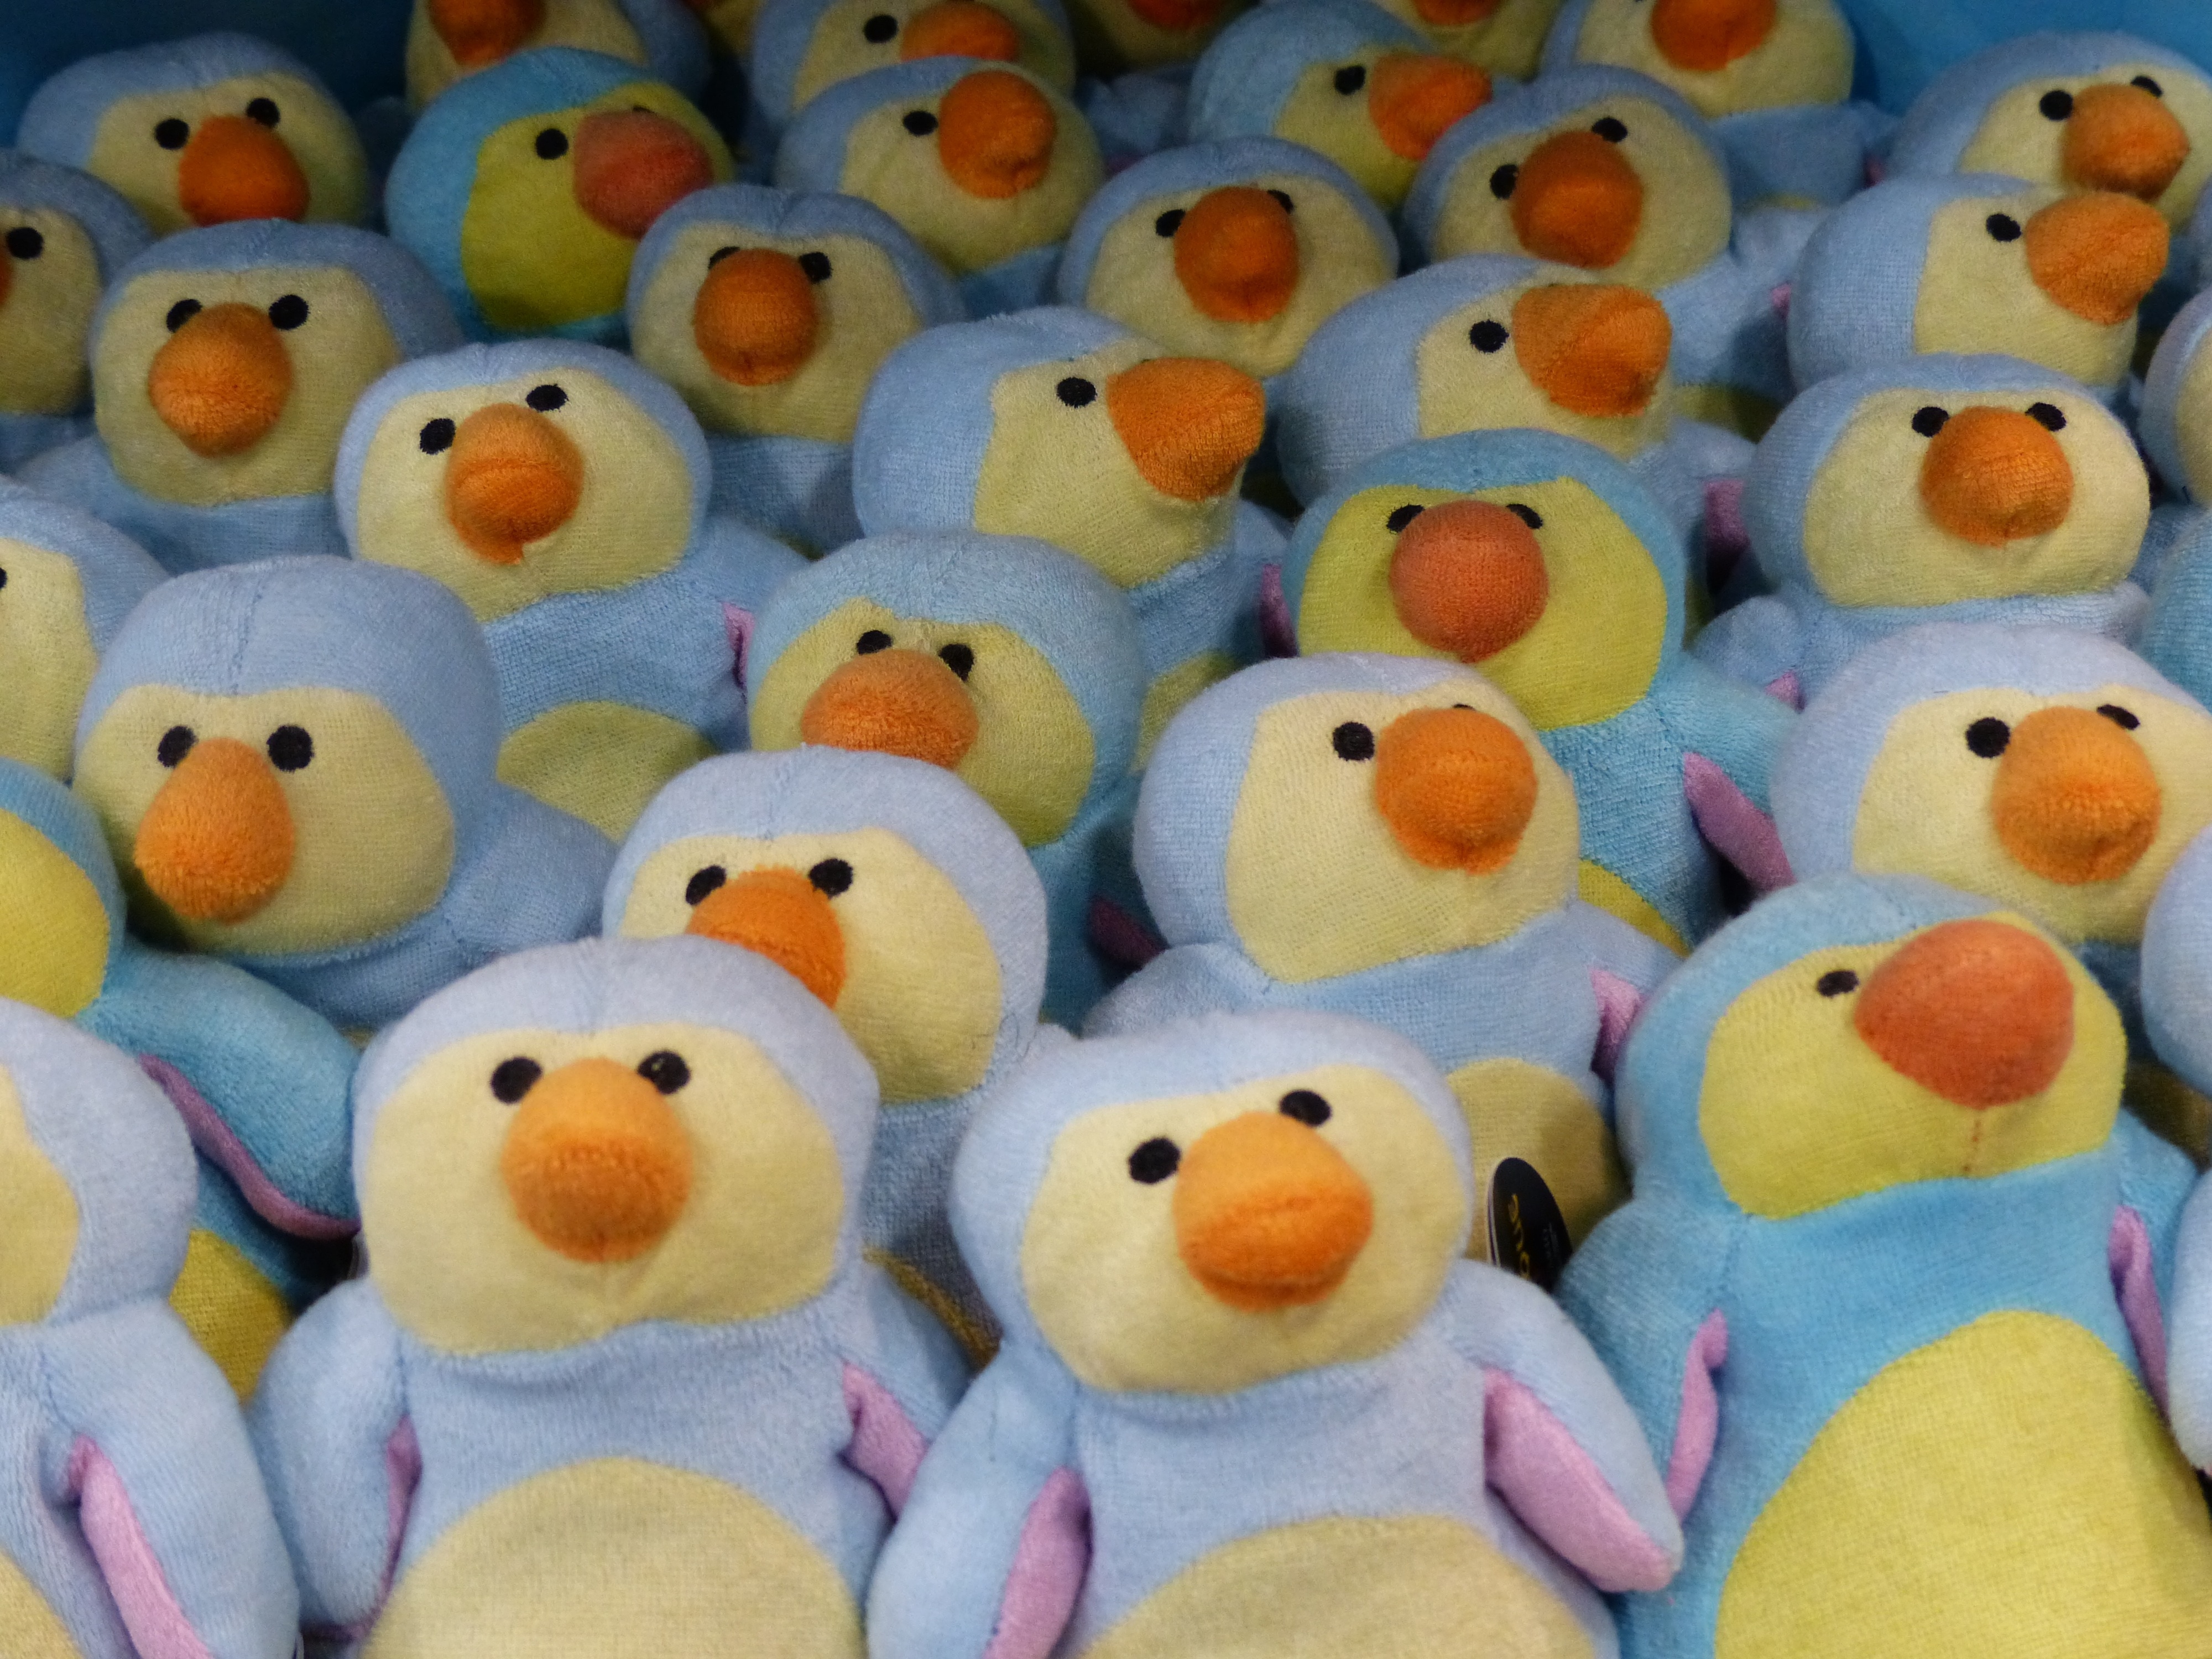 teal and yellow penguin plush toys